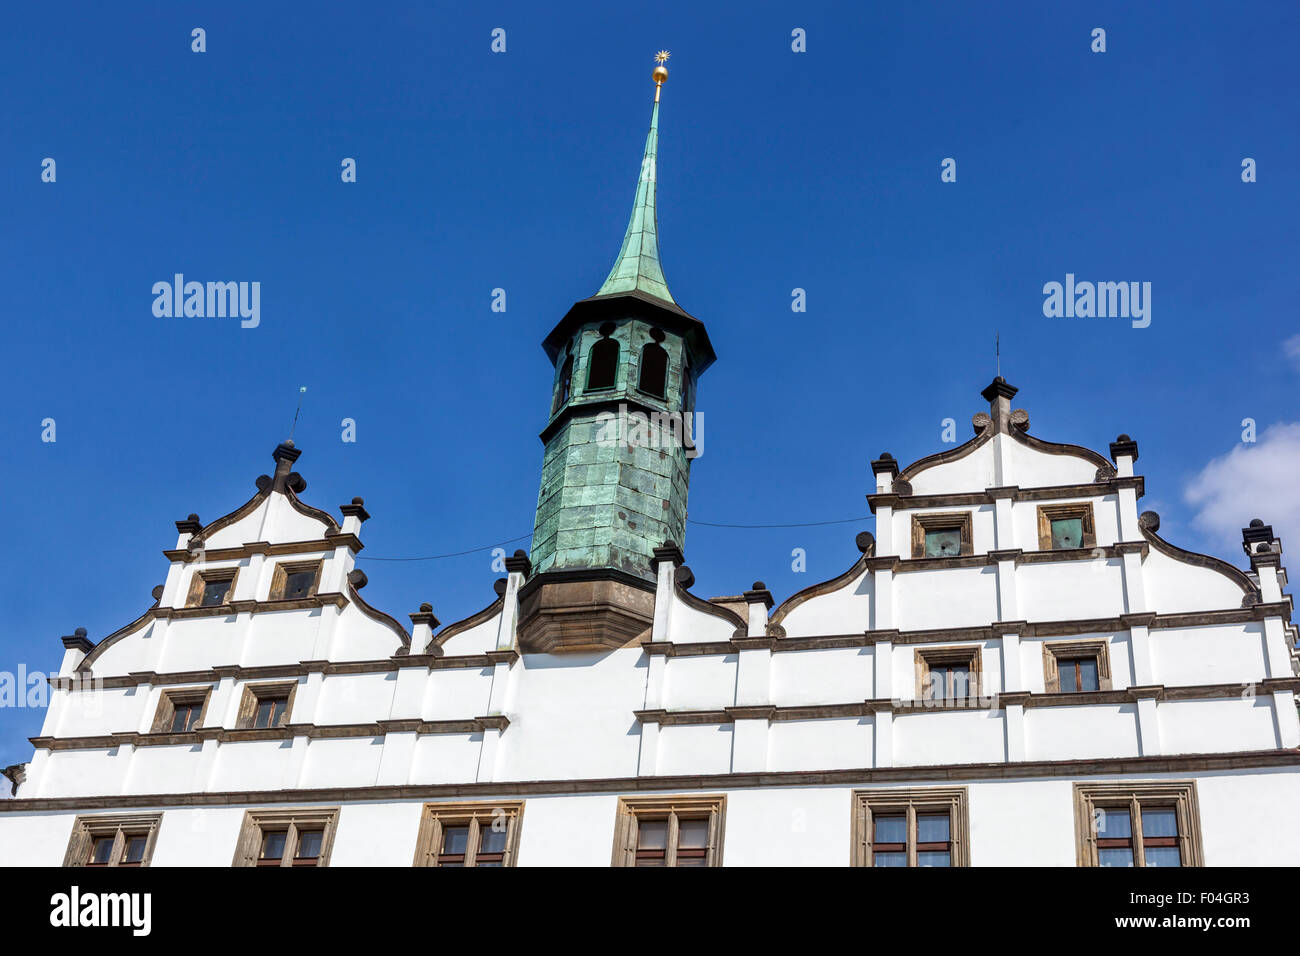 The former town hall on the main square, Litomerice, Northern Bohemia, Czech Republic Stock Photo